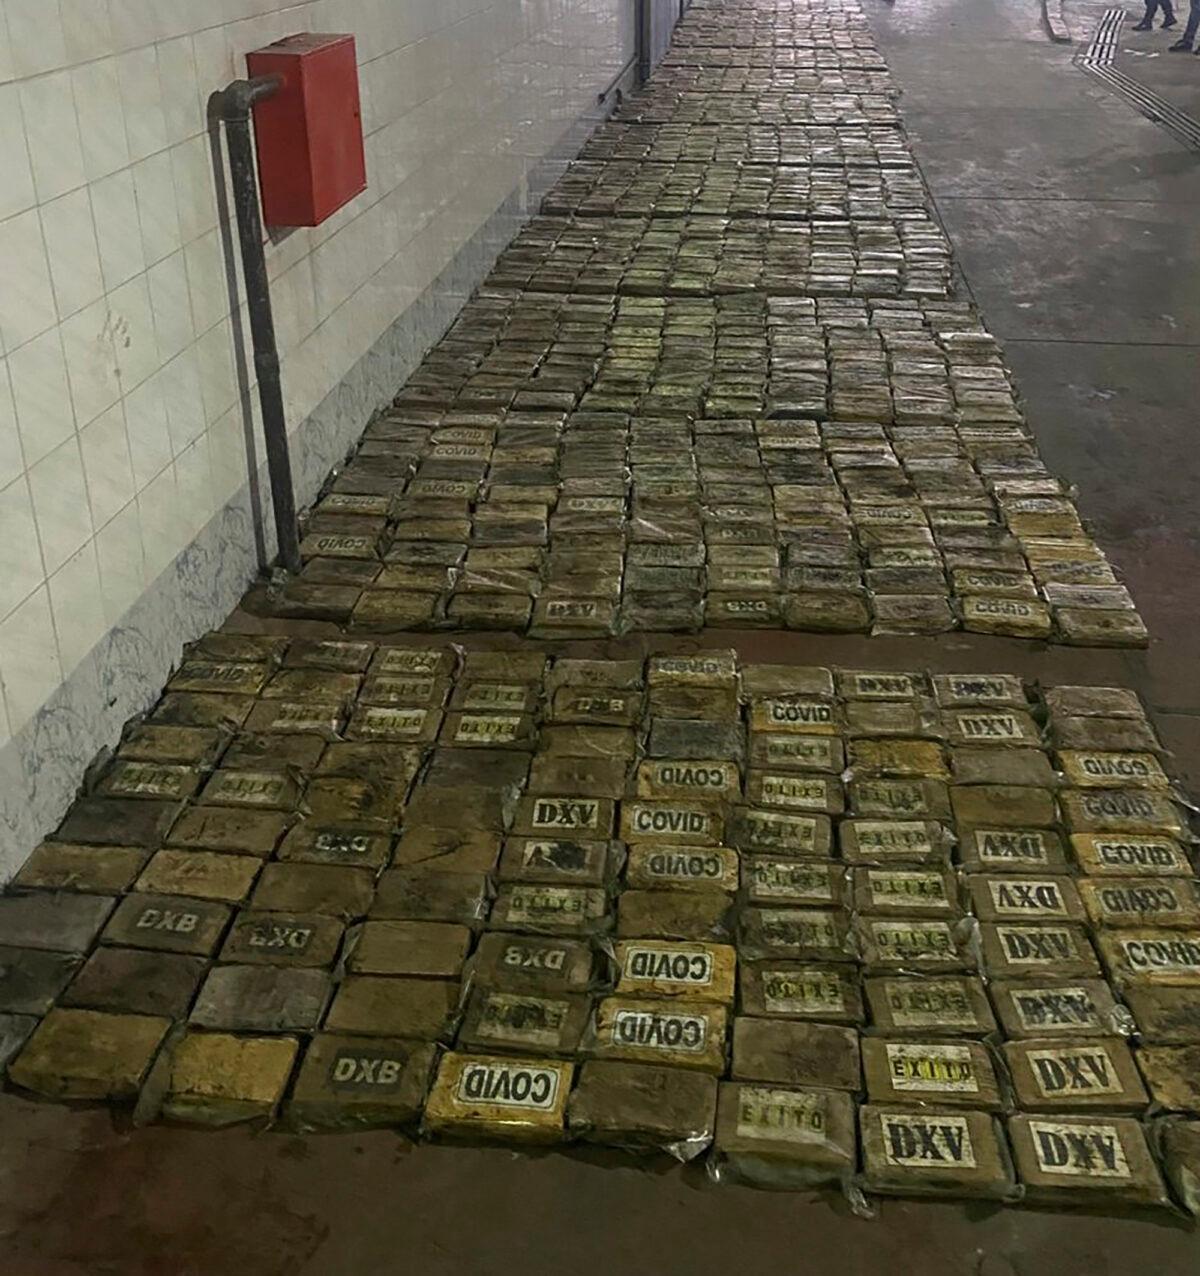 Police discovered 1,250 packages of cocaine in the village of Mojanovici, Montenegro, on Aug. 26, 2021. (Montenegro Police via AP)